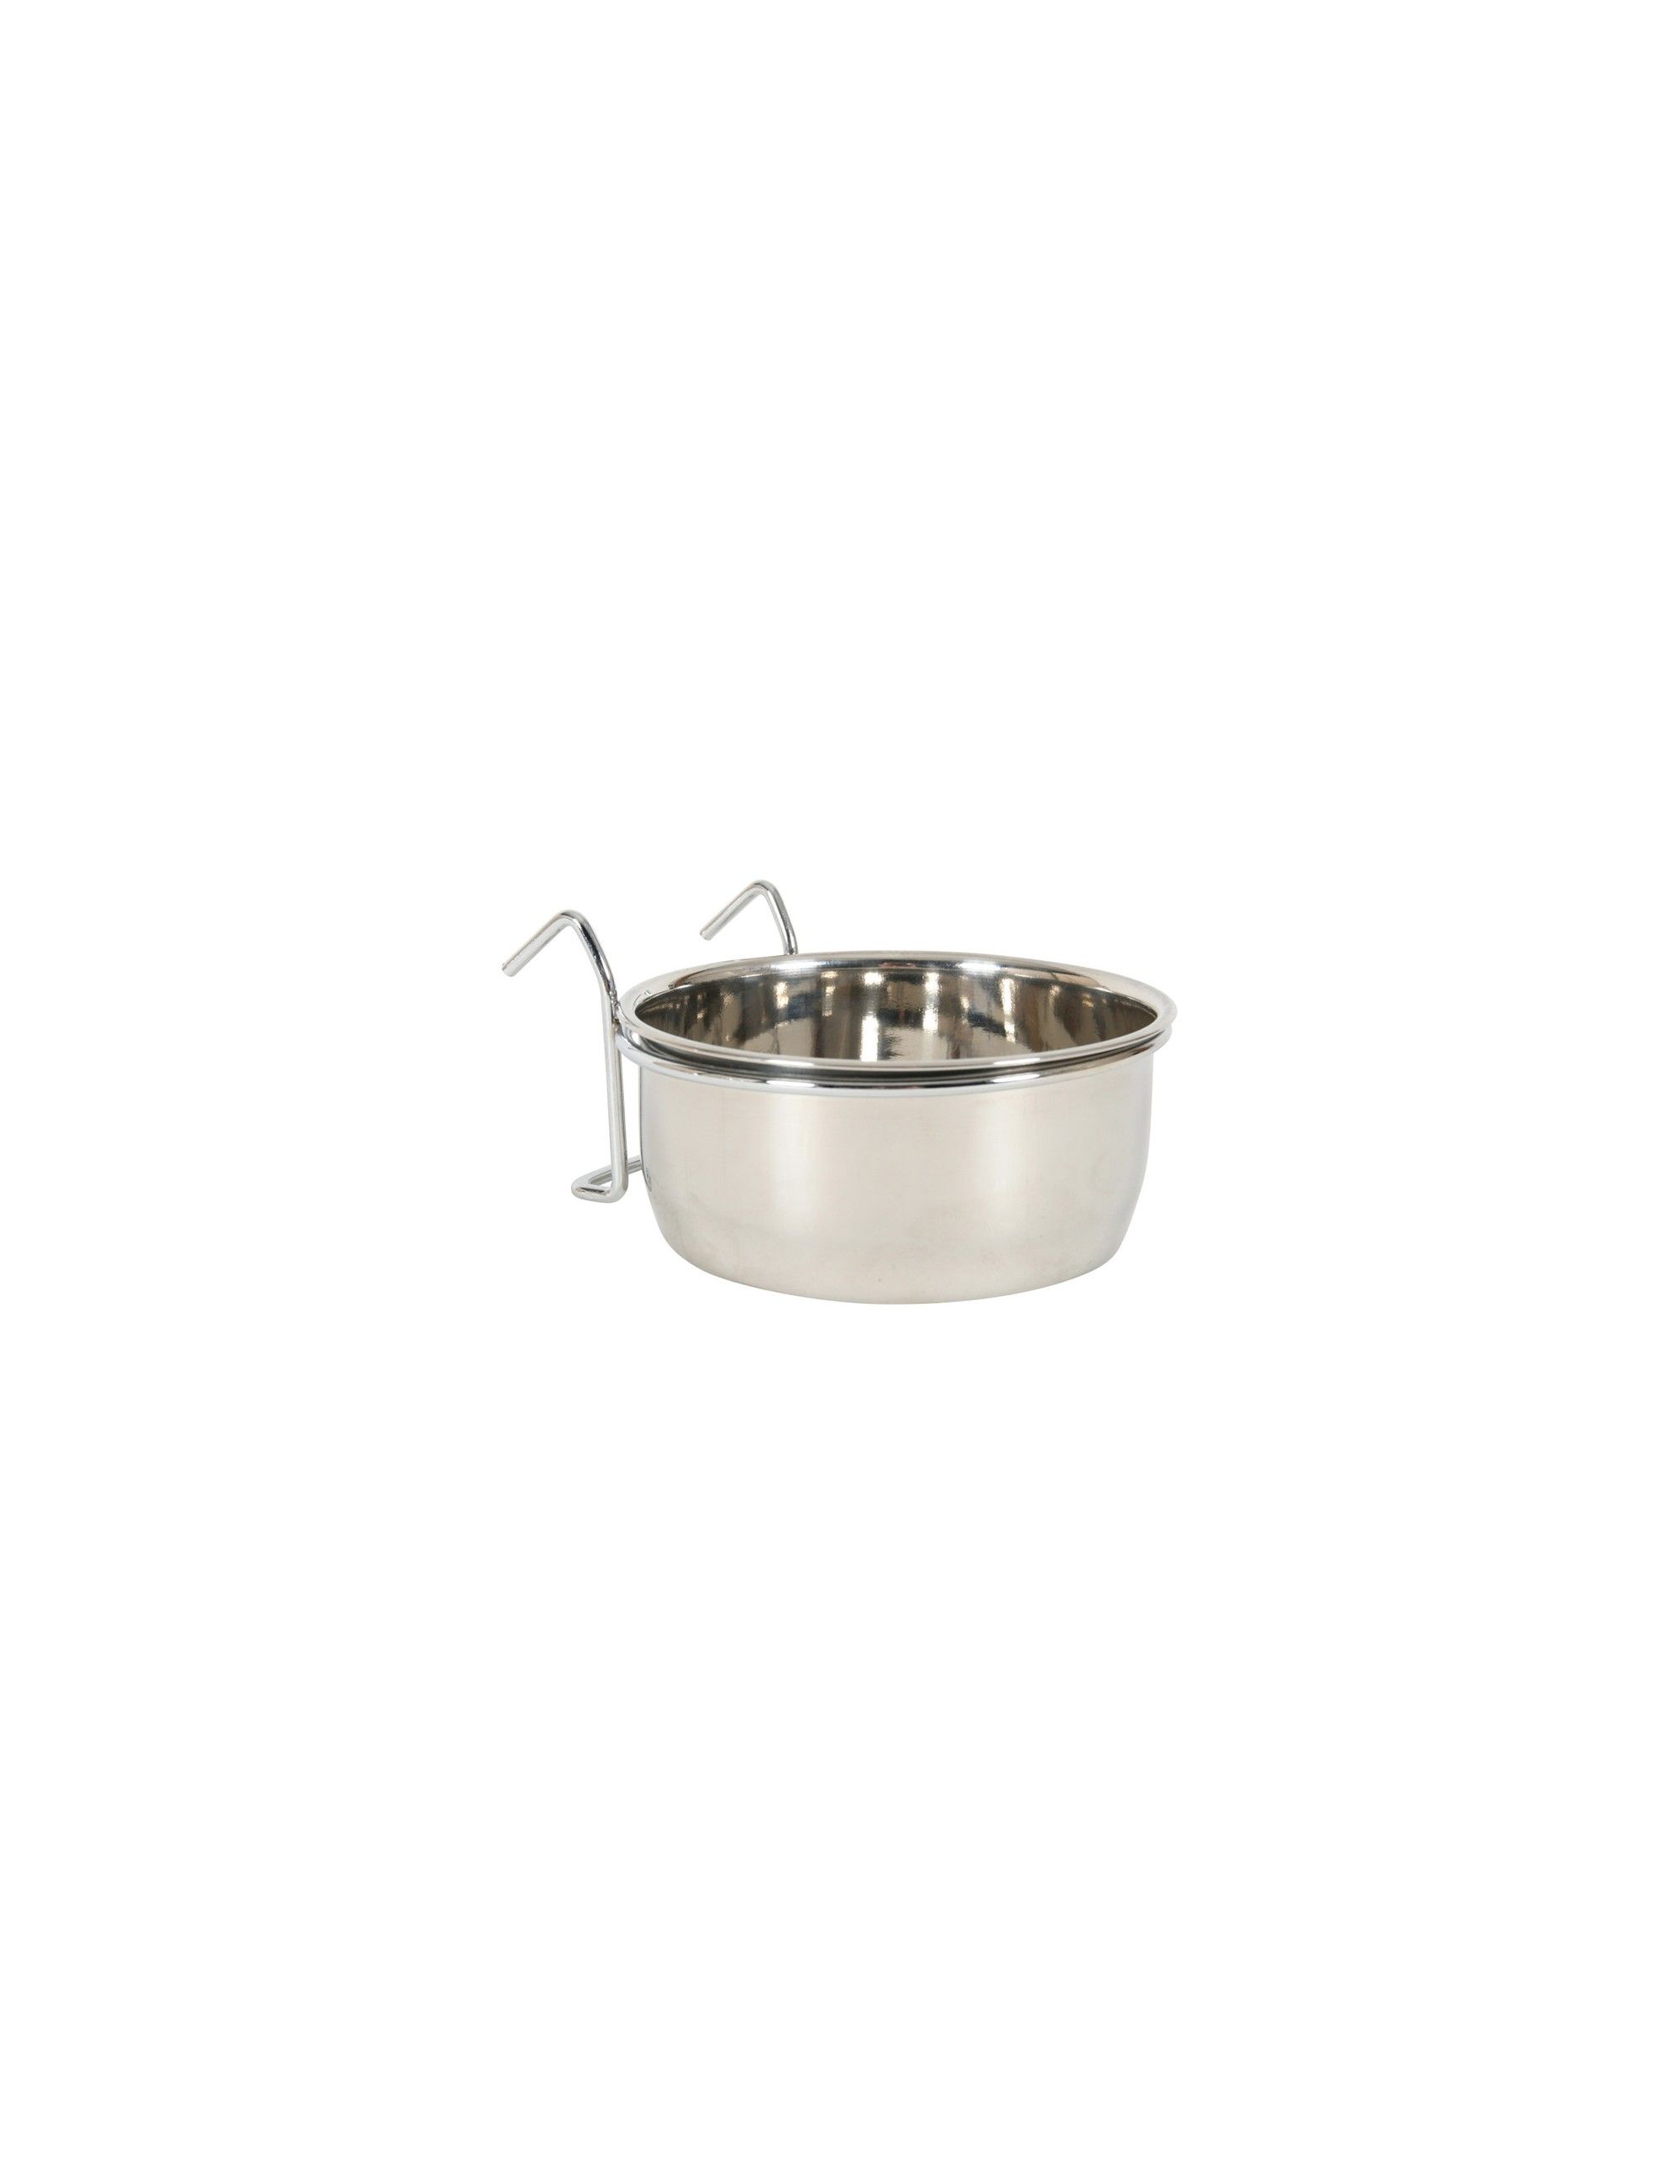 ZOLUX - Stainless Steel Hanging Bowl